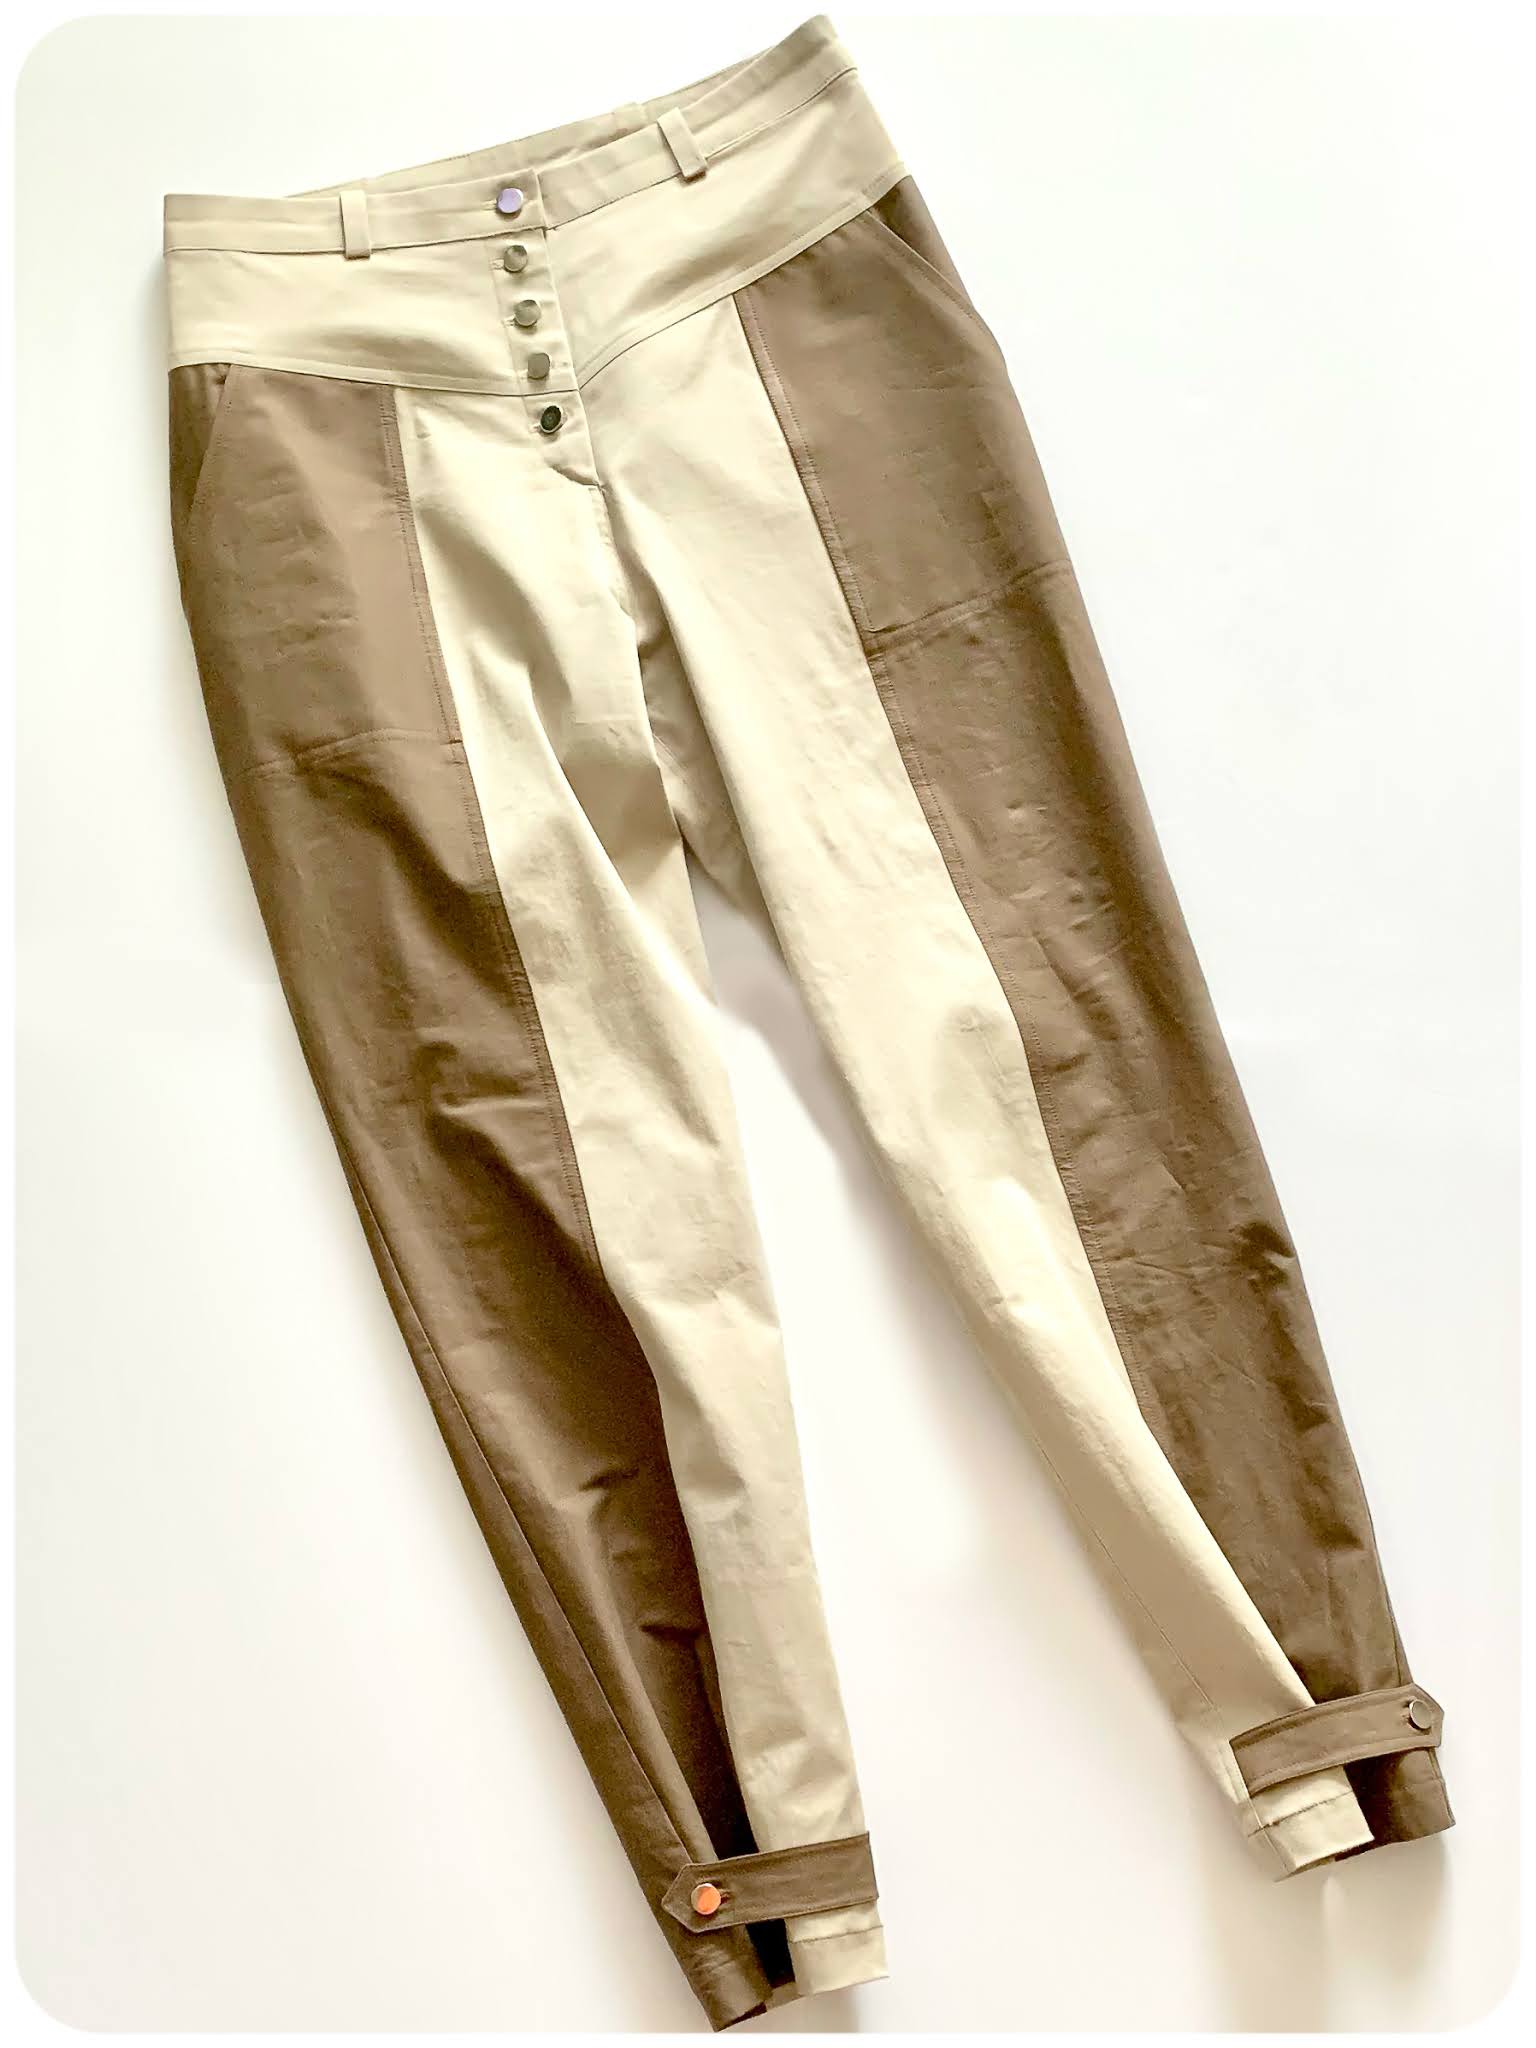 McCall's 8045 - Colorblock Tapered Utility Pants - Erica Bunker DIY Style!